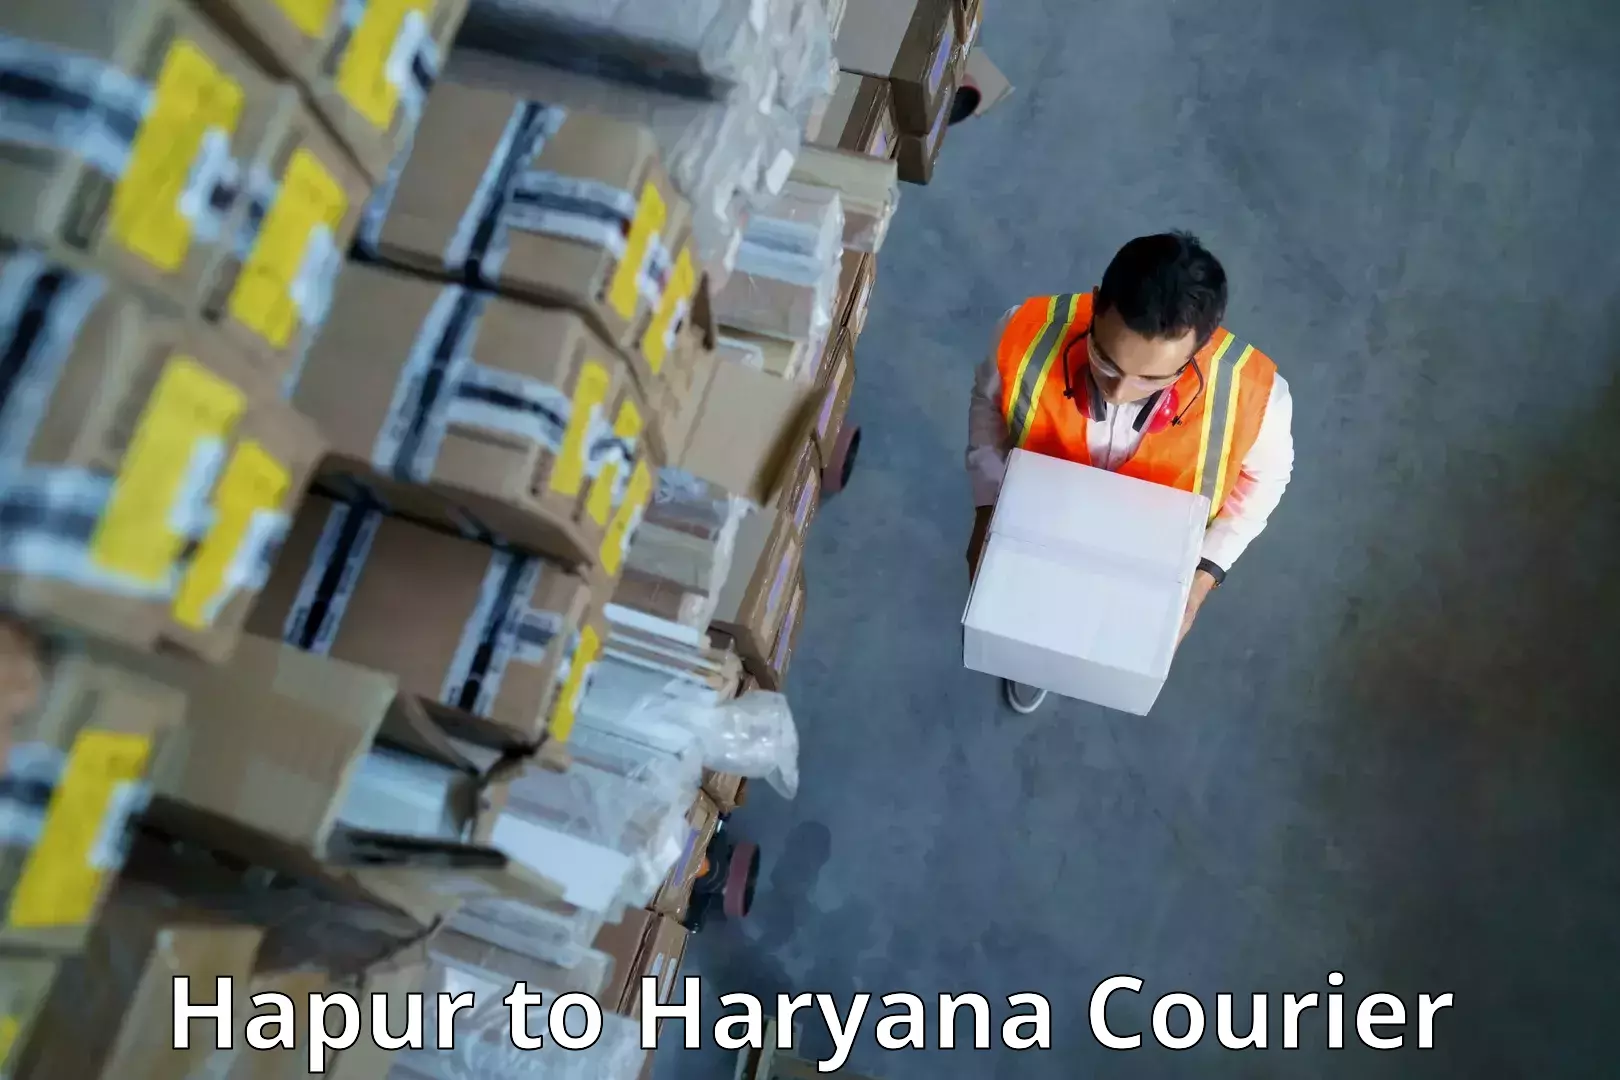 State-of-the-art courier technology Hapur to Loharu